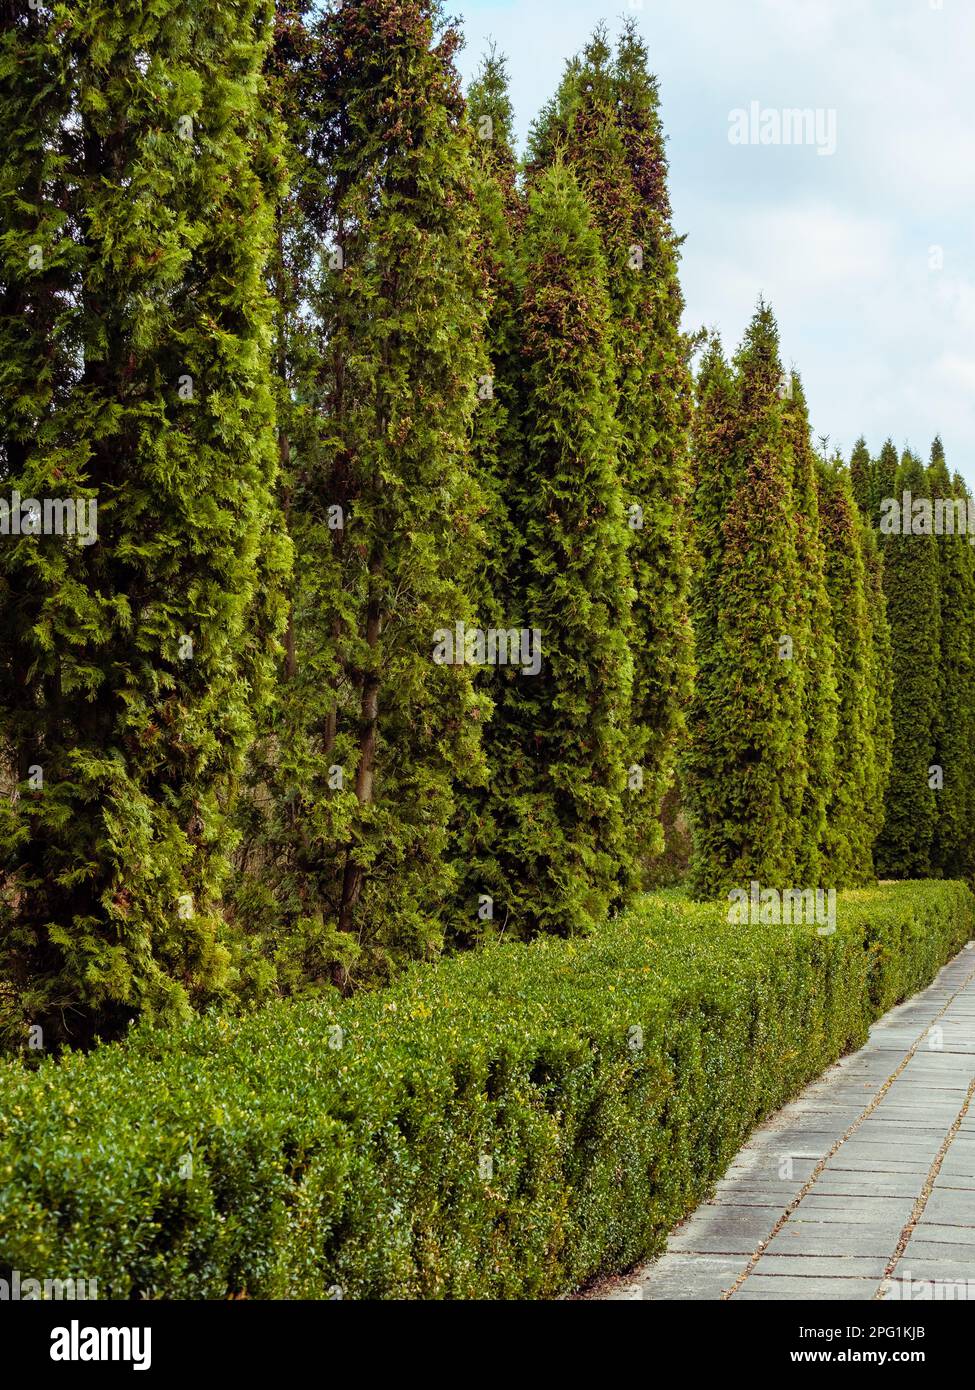 Walking way made of concrete slabs along the green thuja trees Stock Photo